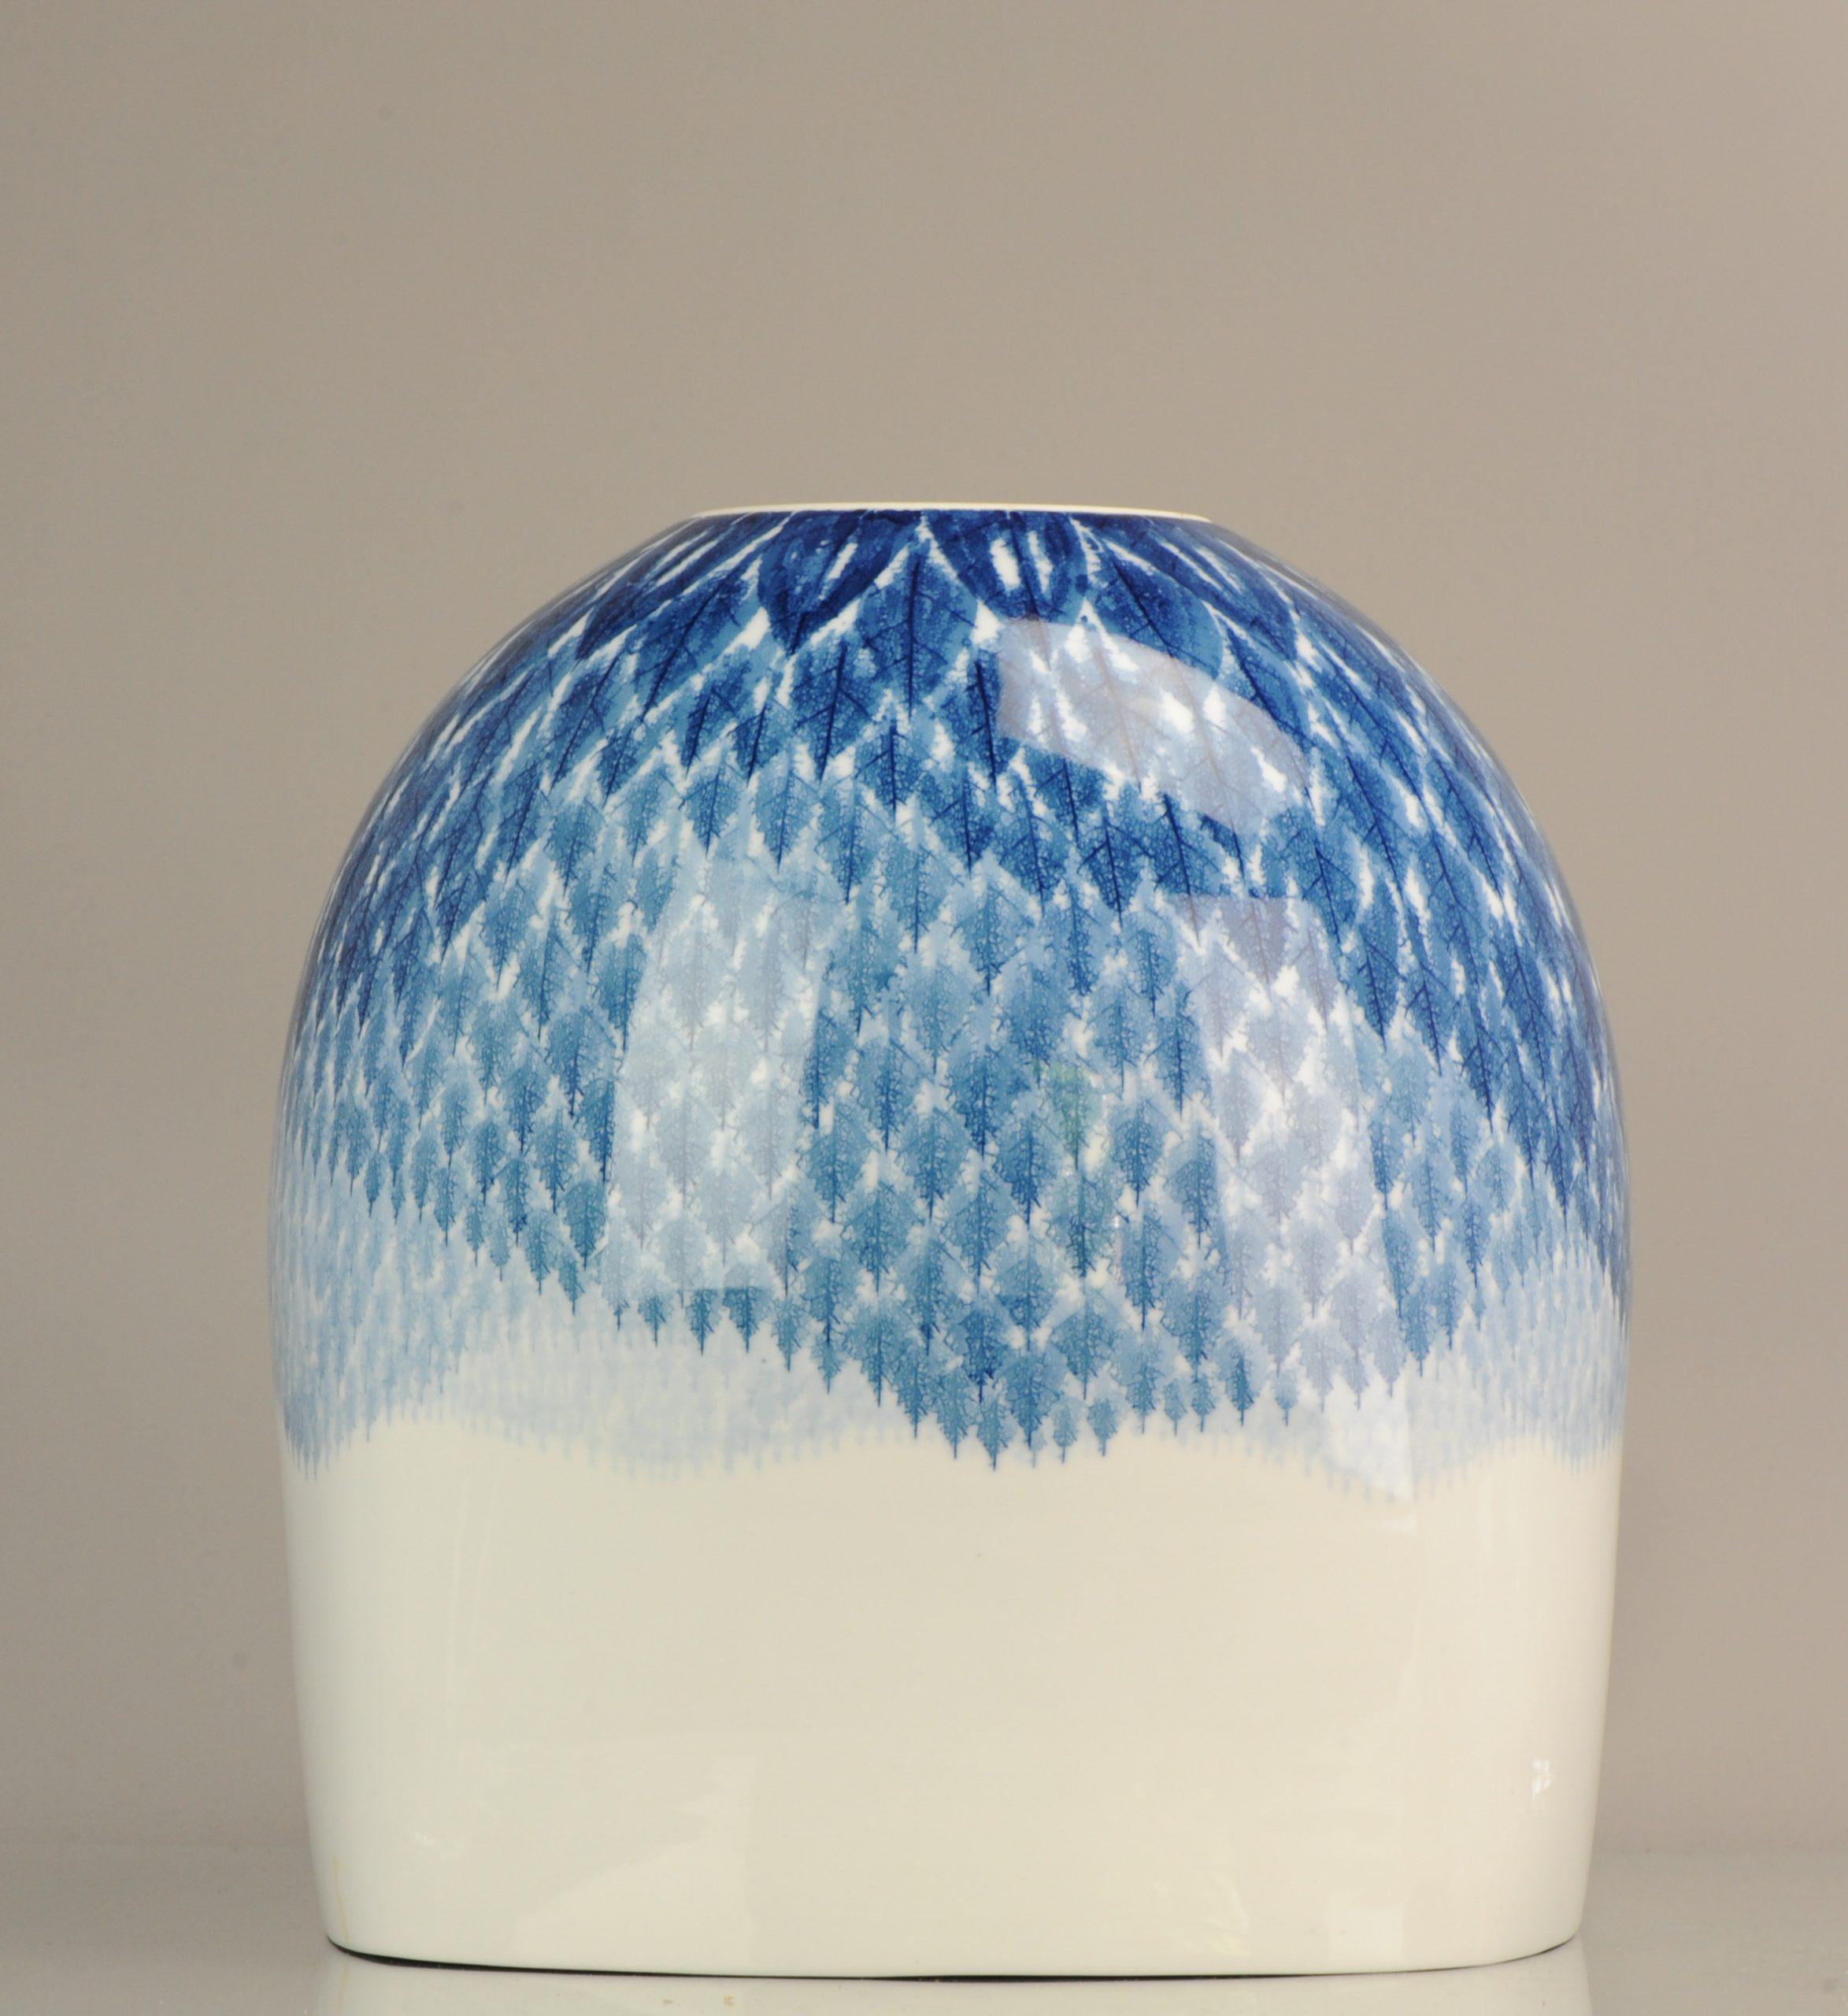 Fine Art Japanese Winter Landscape Vase Arita by Artist Fujii Shumei In Excellent Condition For Sale In Amsterdam, Noord Holland